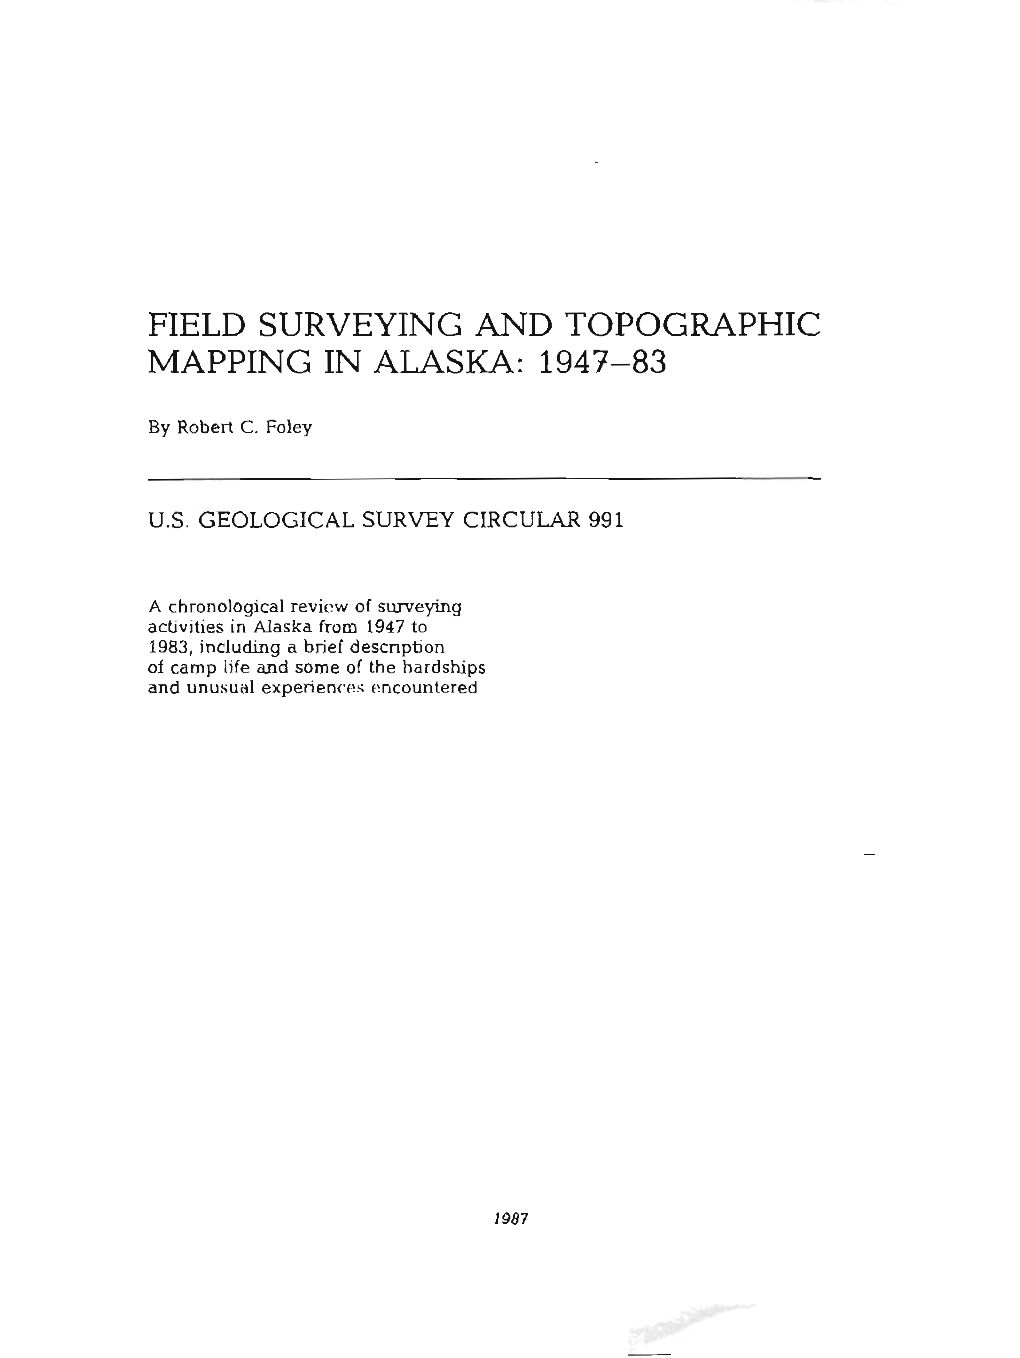 Field Surveying and Topographic Mapping in Alaska: 1947-83